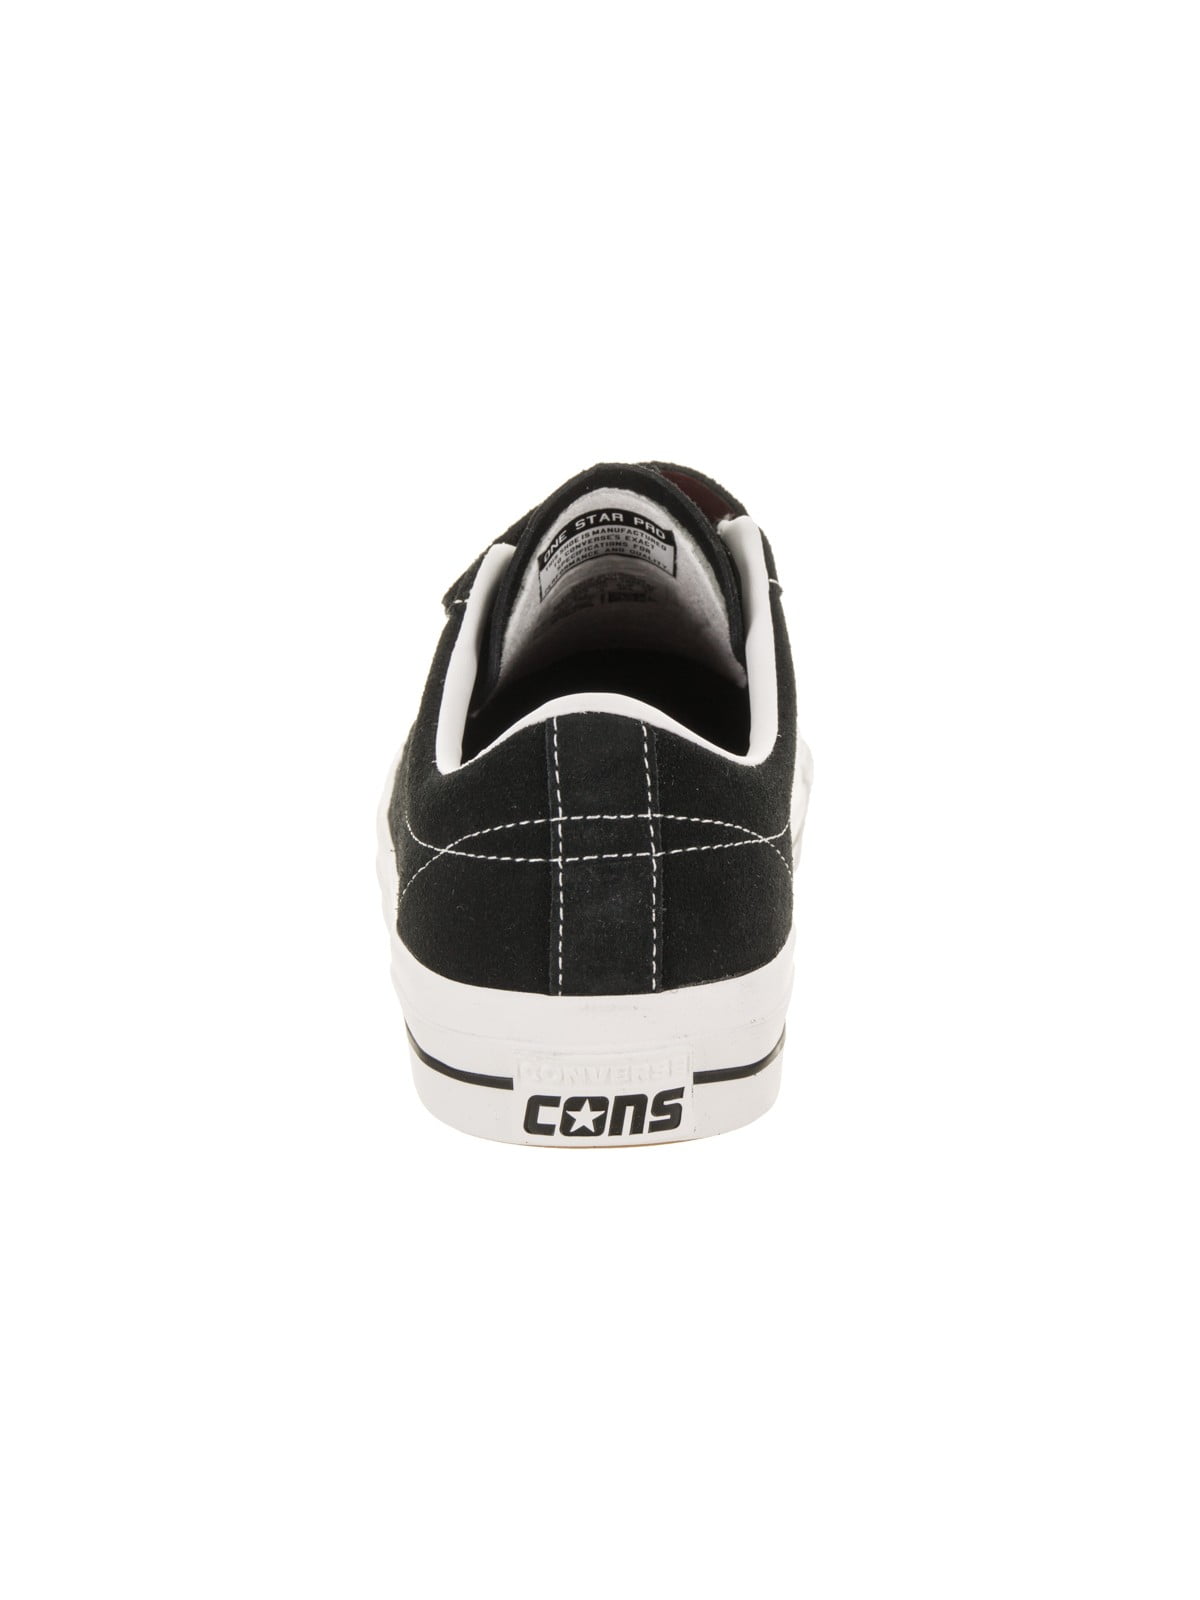 converse one star pro 3v ox black & white shoes